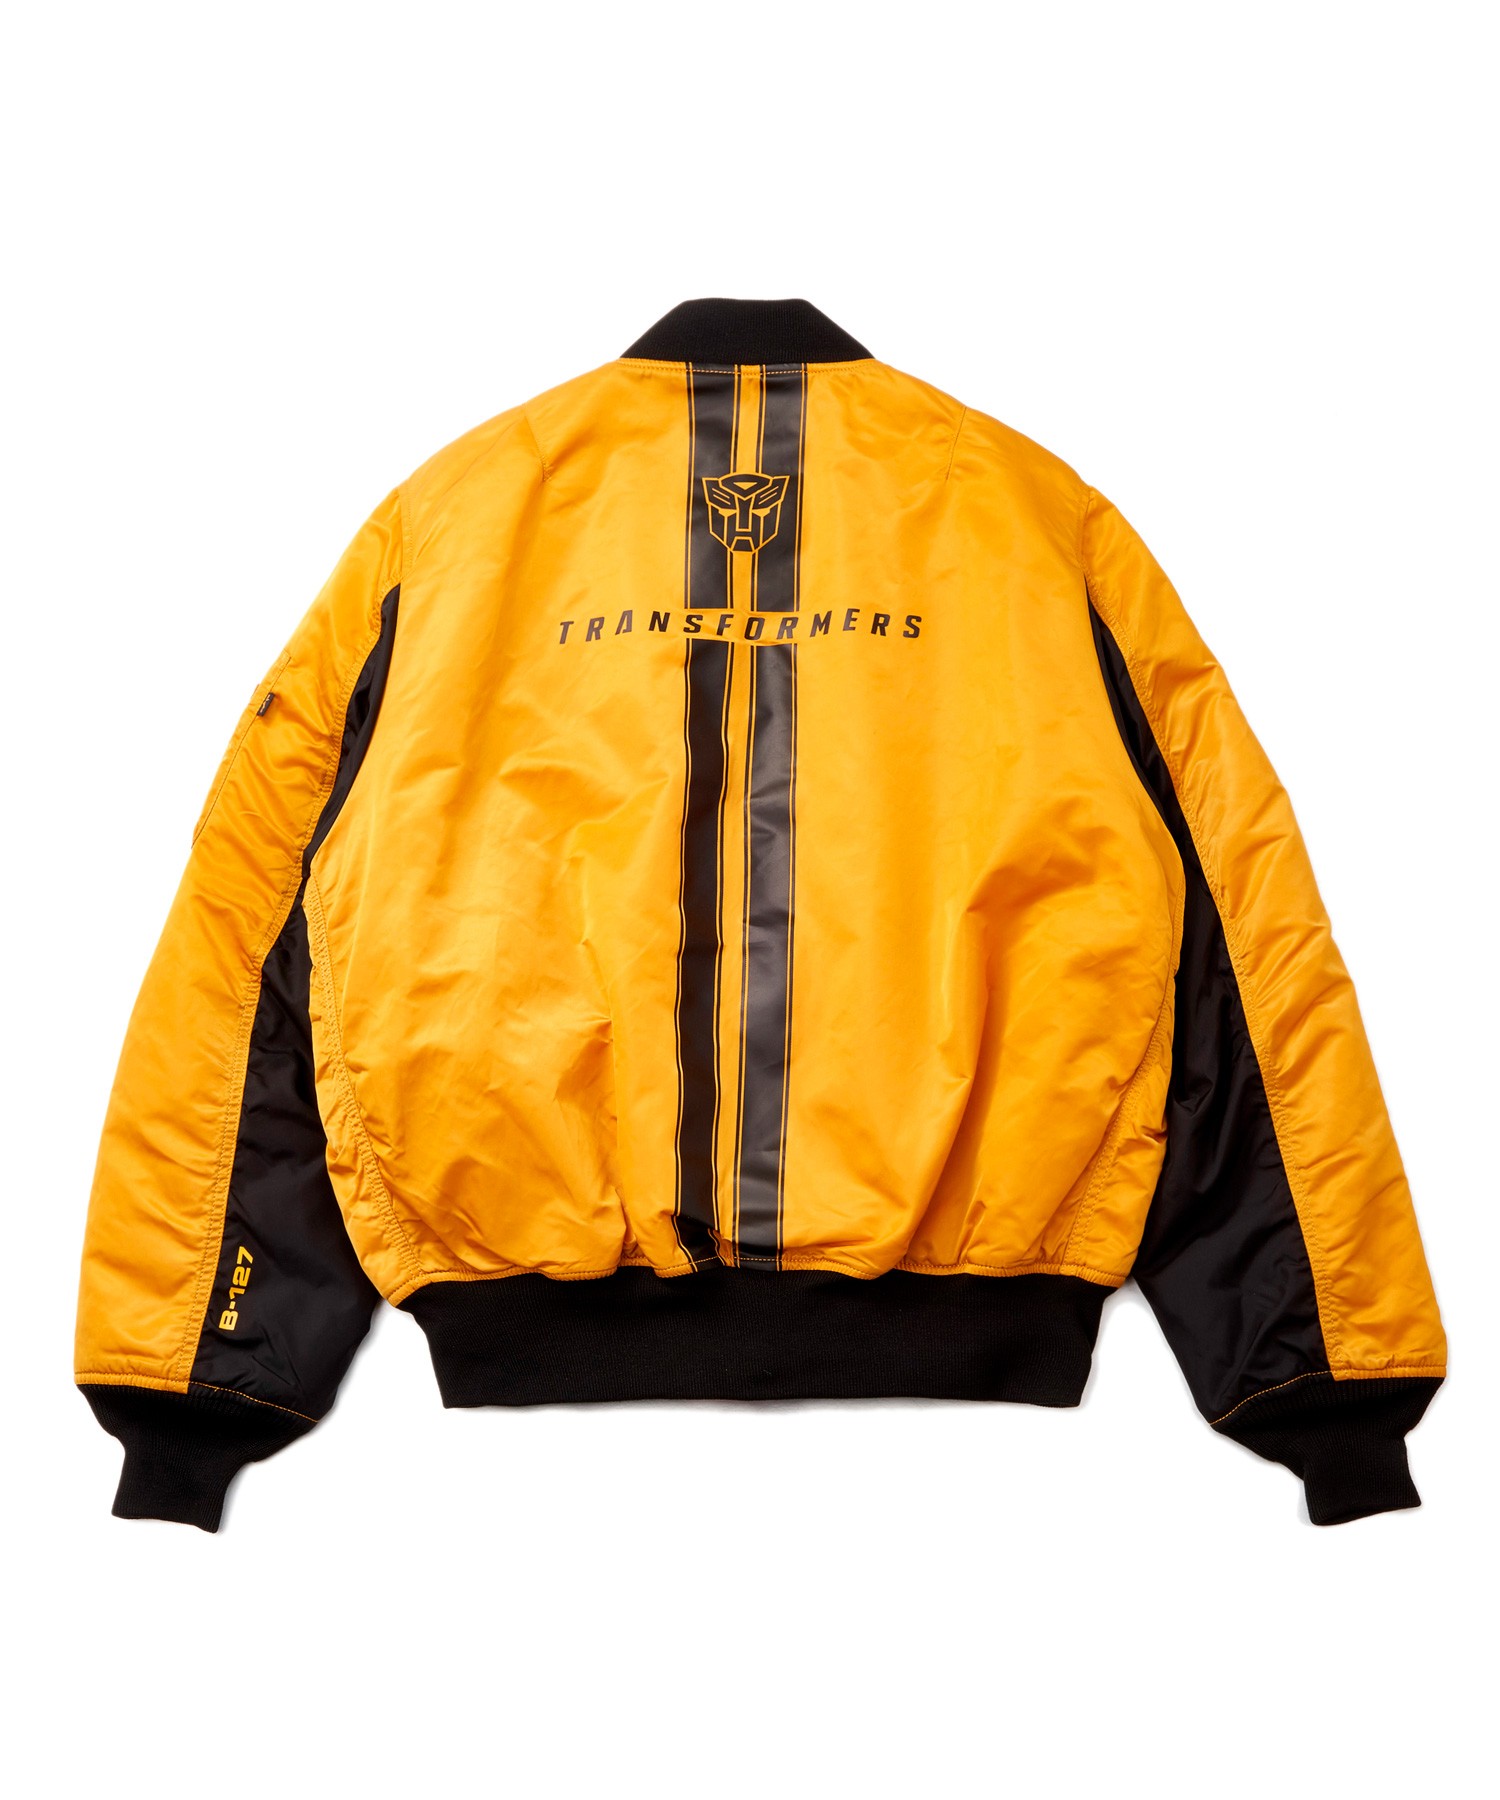 More Images of Alpha MA-1 Transformers Bumblebee Reversible Jacket